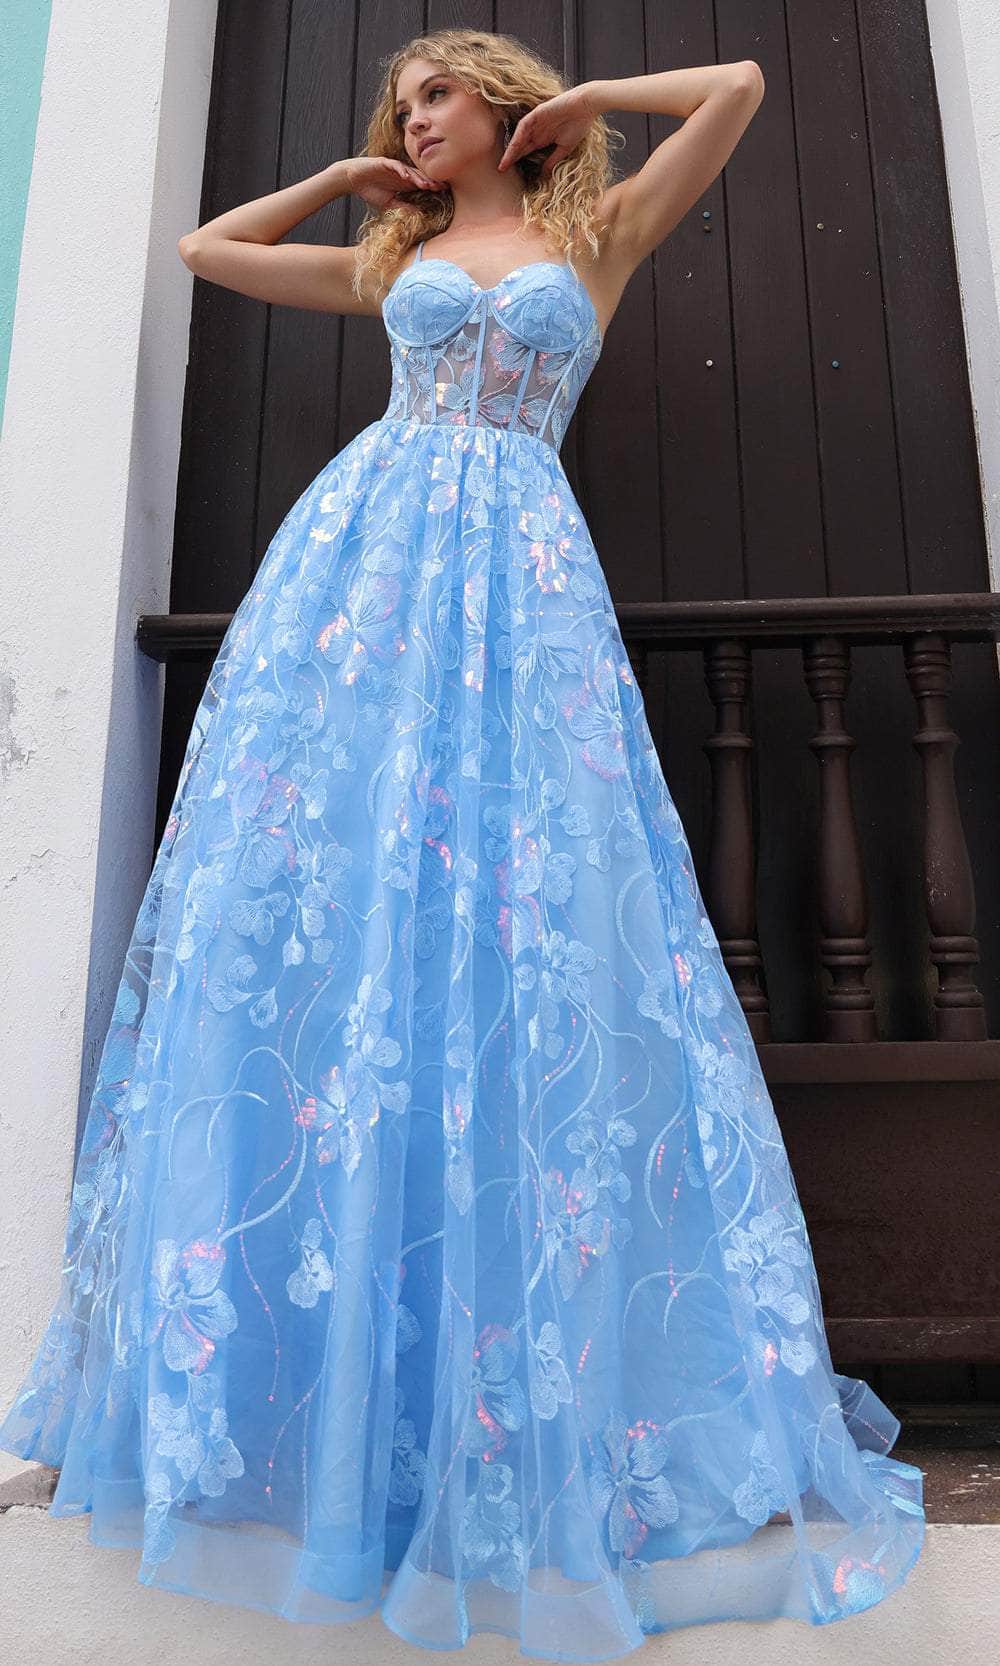 Nox Anabel T1332 - Floral Printed Corset Prom Gown
